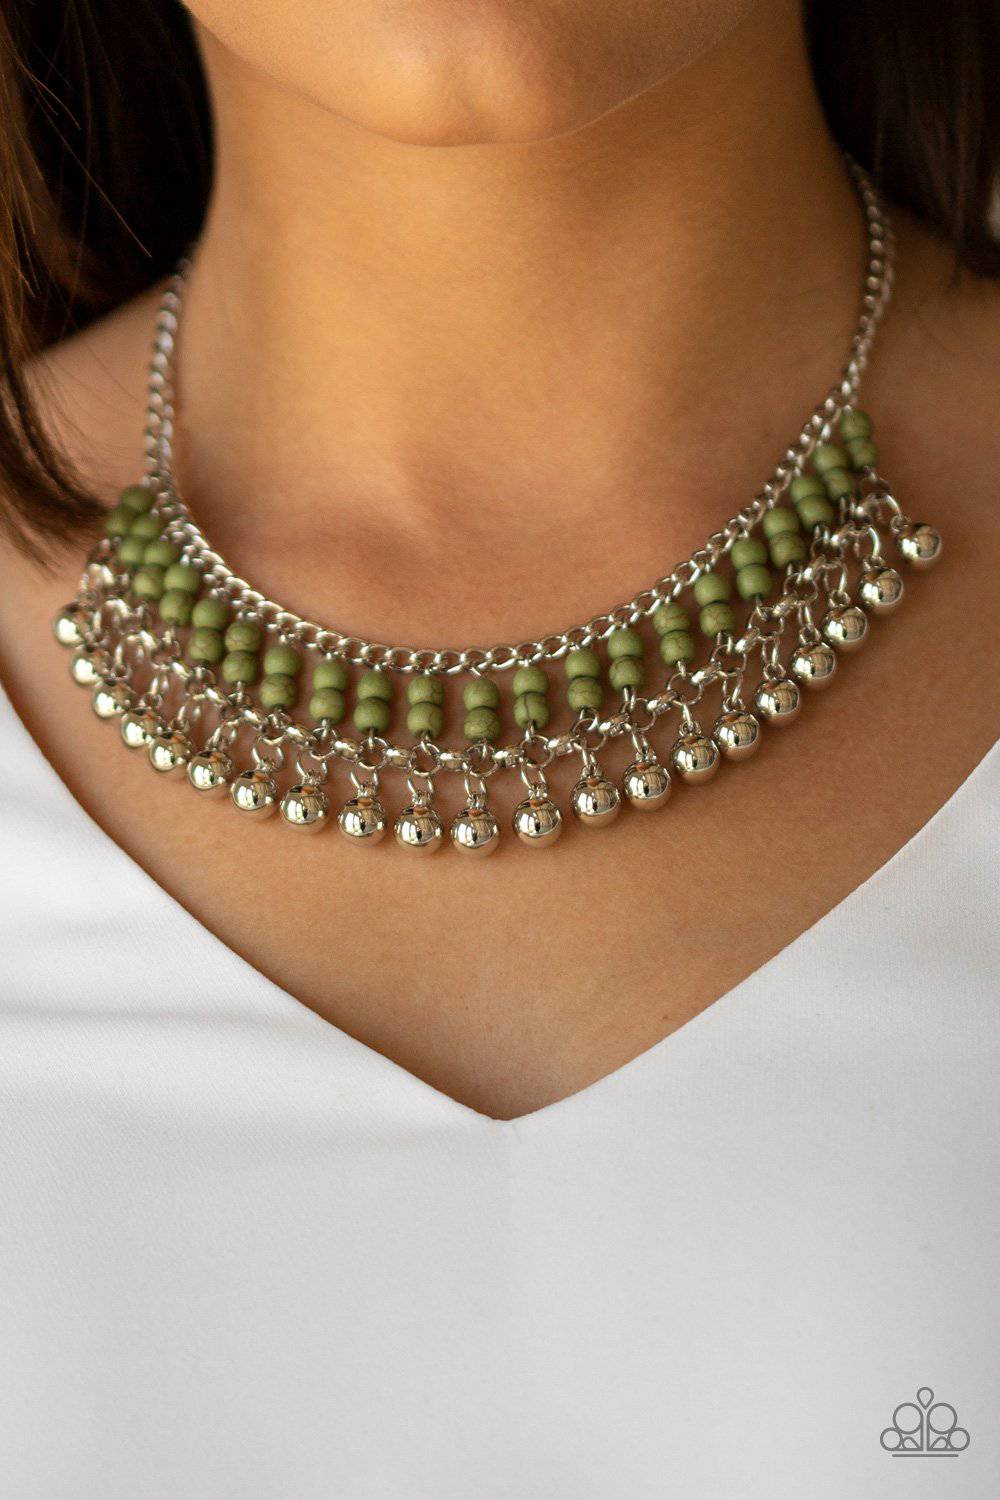 Beaded Bliss - Green Stone Beads Necklace - Paparazzi Accessories - GlaMarous Titi Jewels